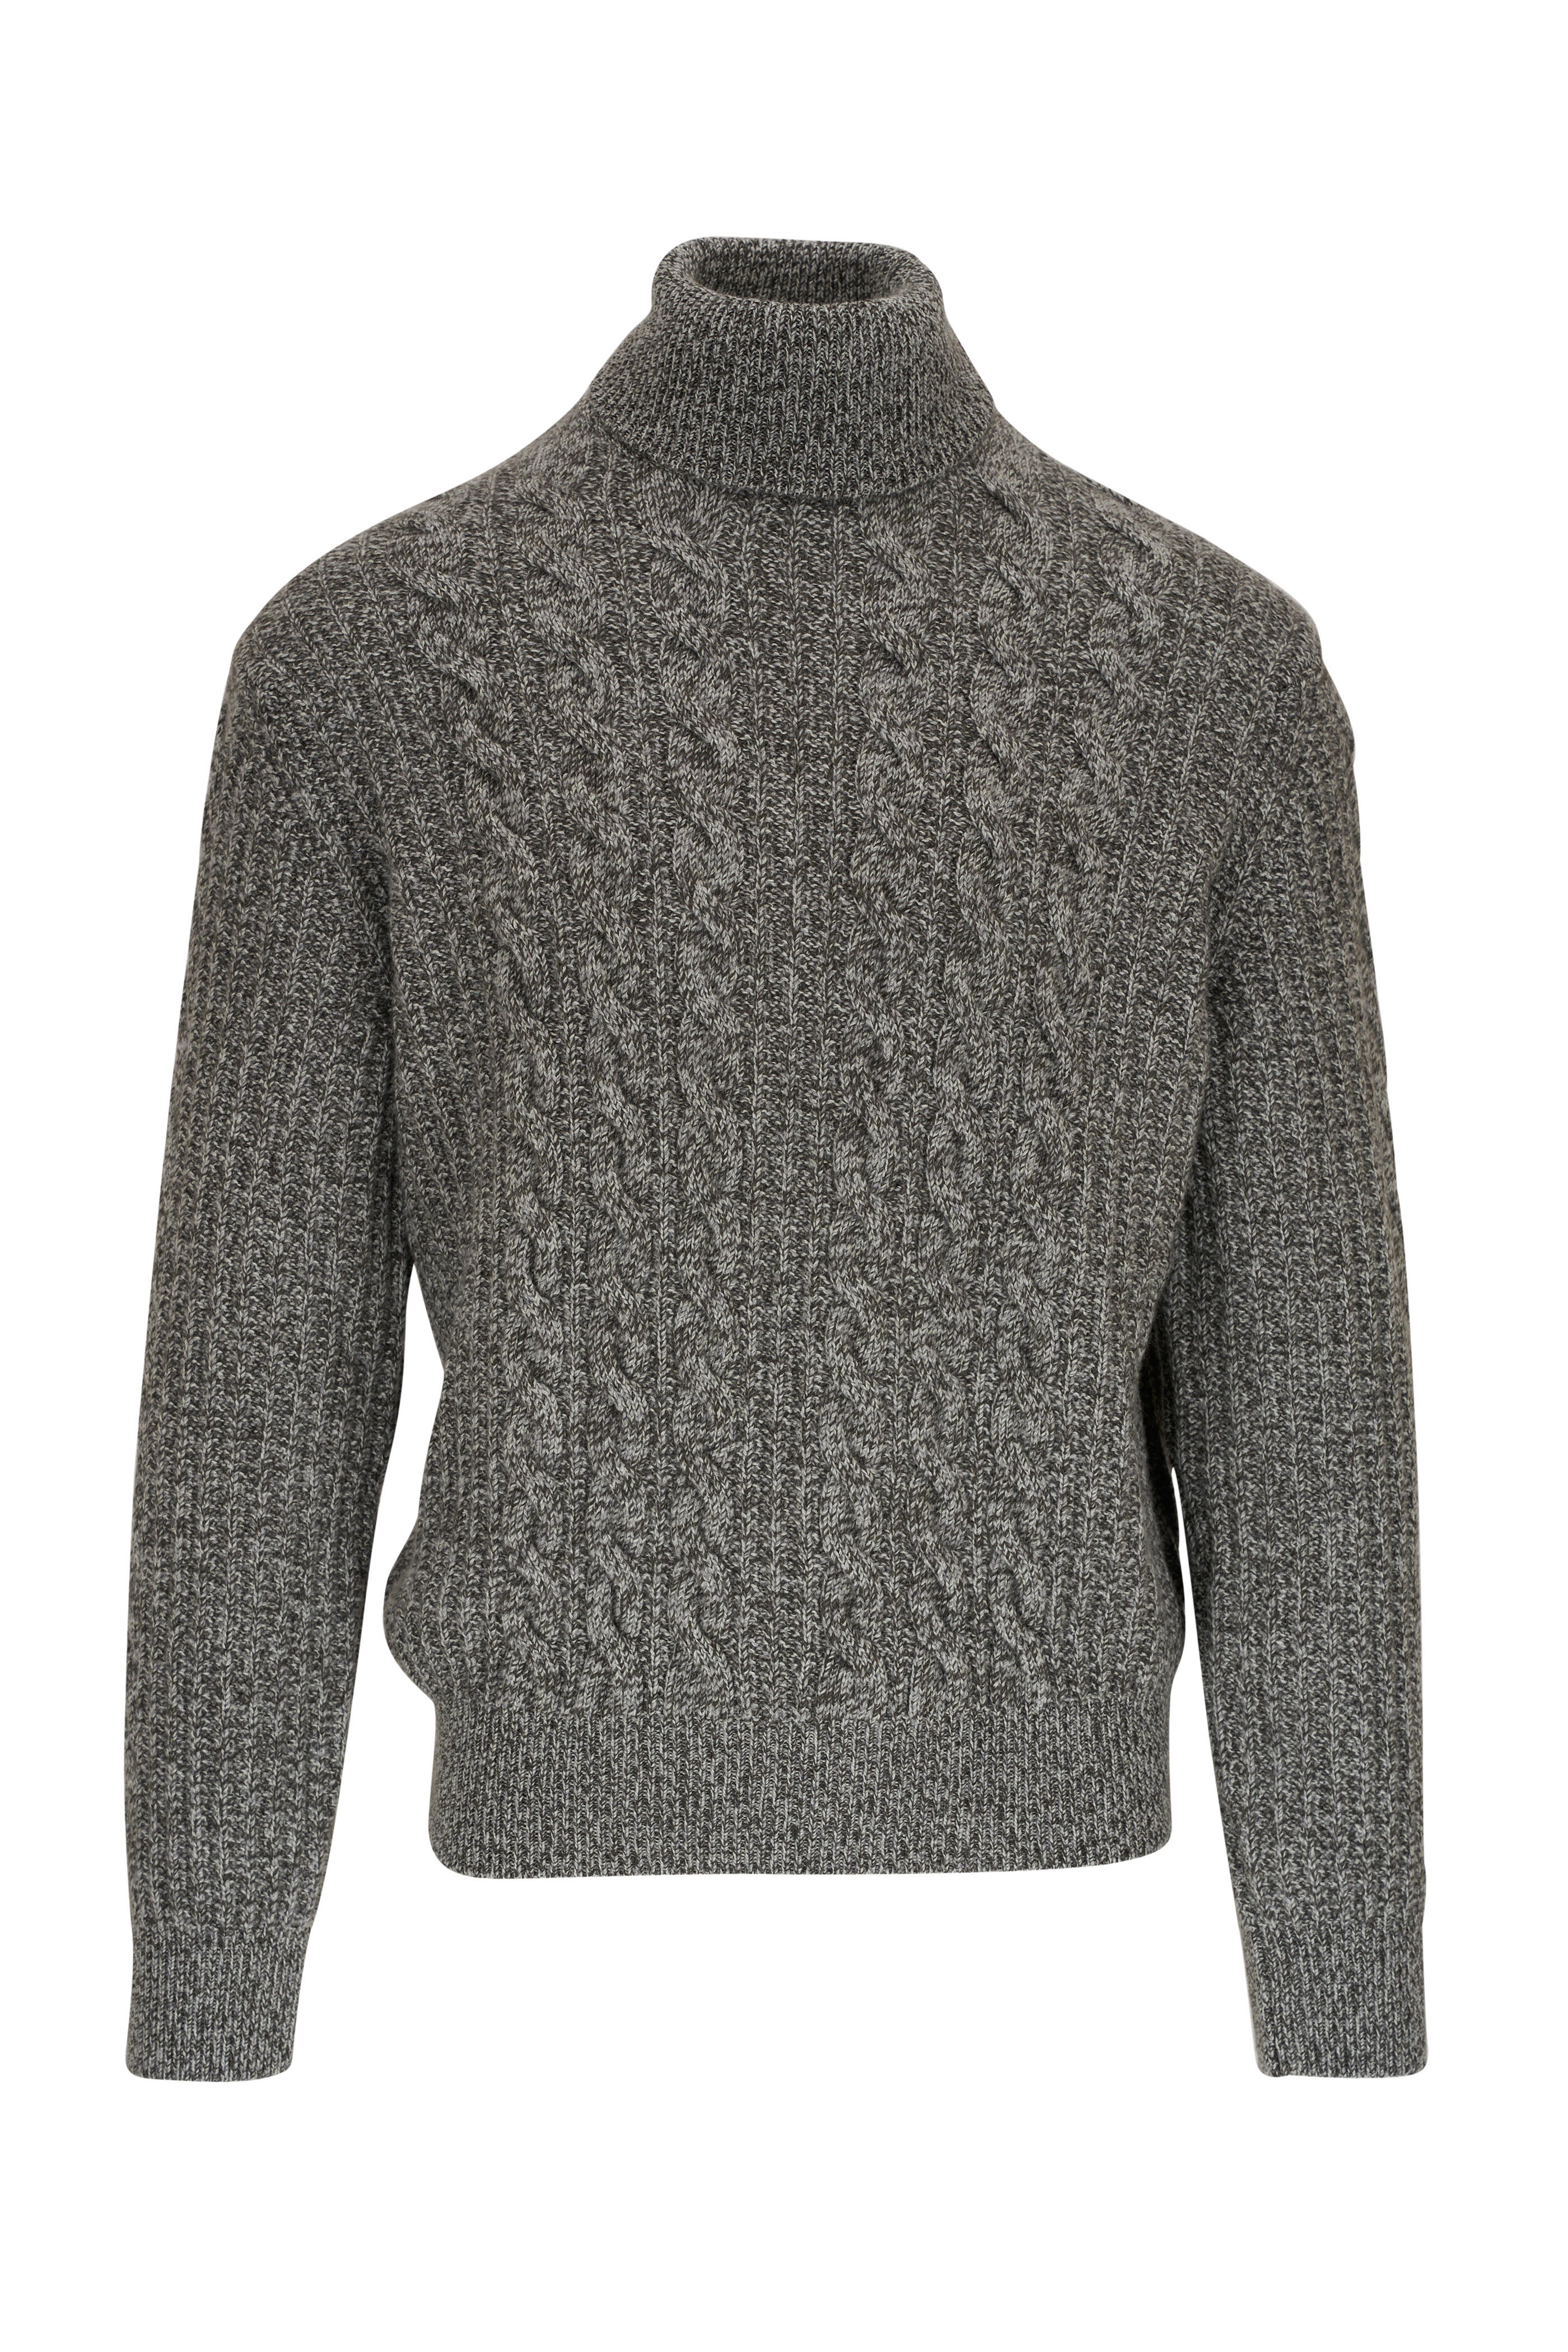 Agnona - Olive & Gray Cable Knit Turtleneck Sweater